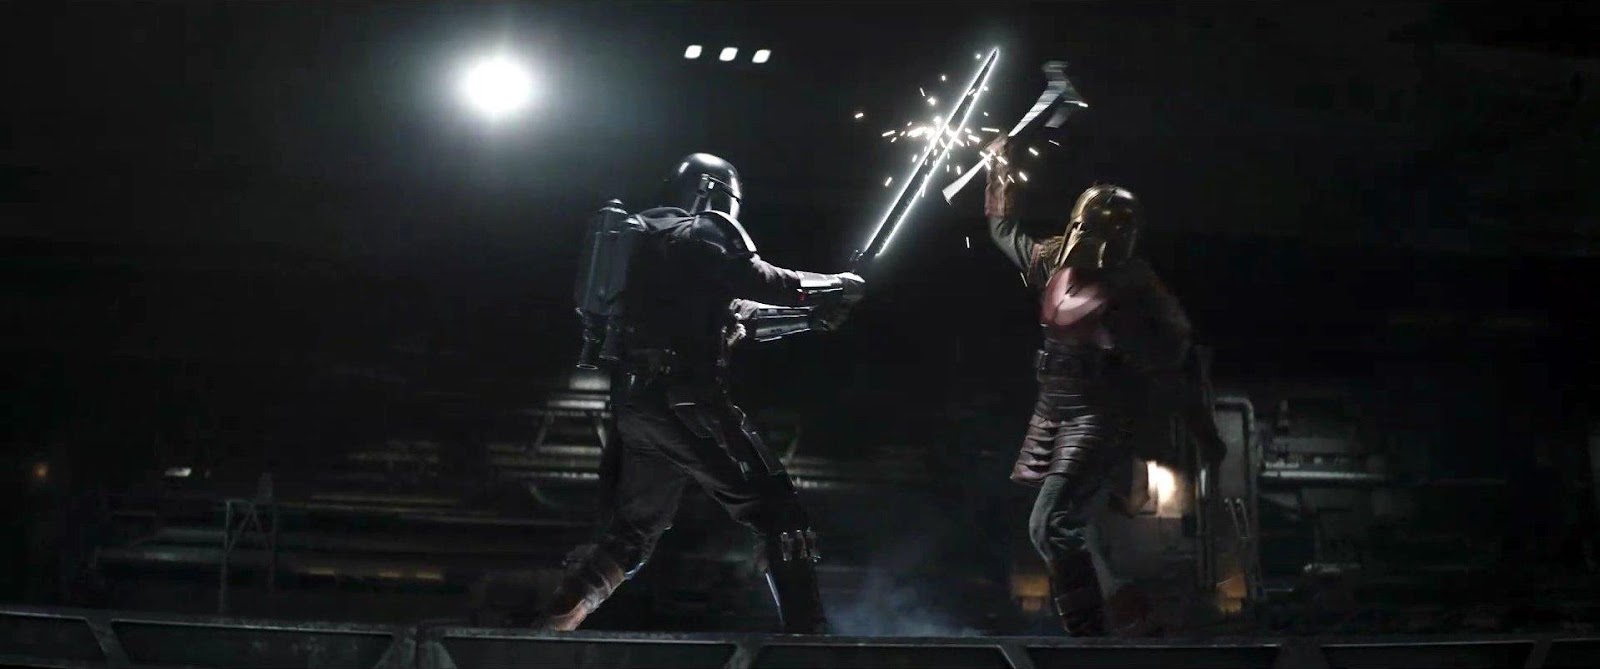 Mando and The Armorer train with the Darksaber.